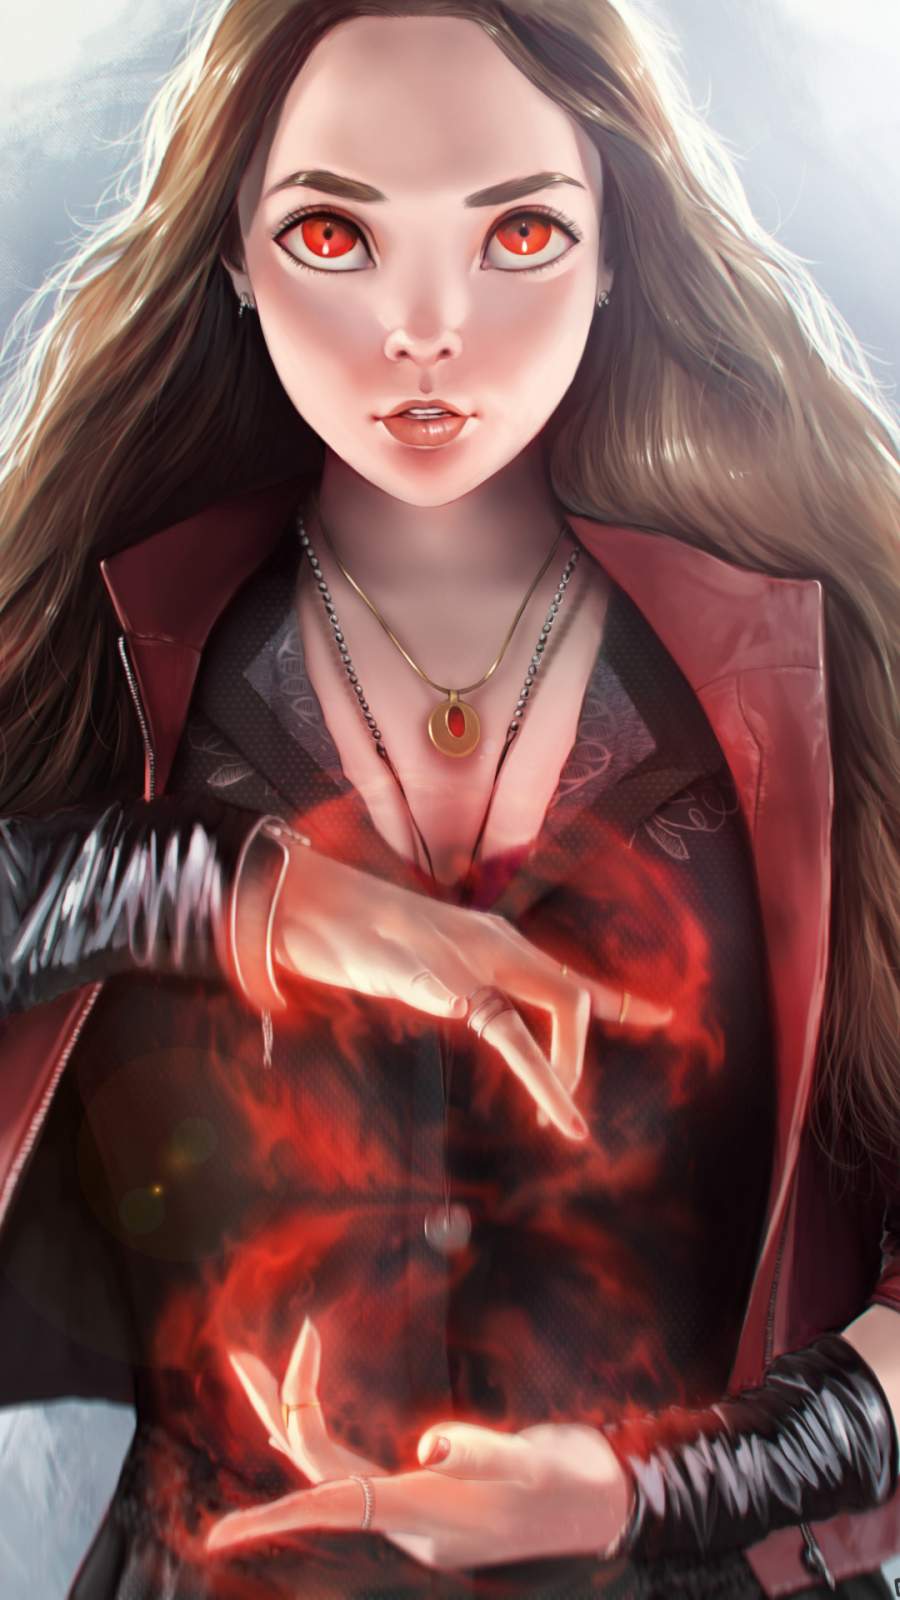 Cute Scarlet Witch IPhone Wallpaper Wallpaper, iPhone Wallpaper